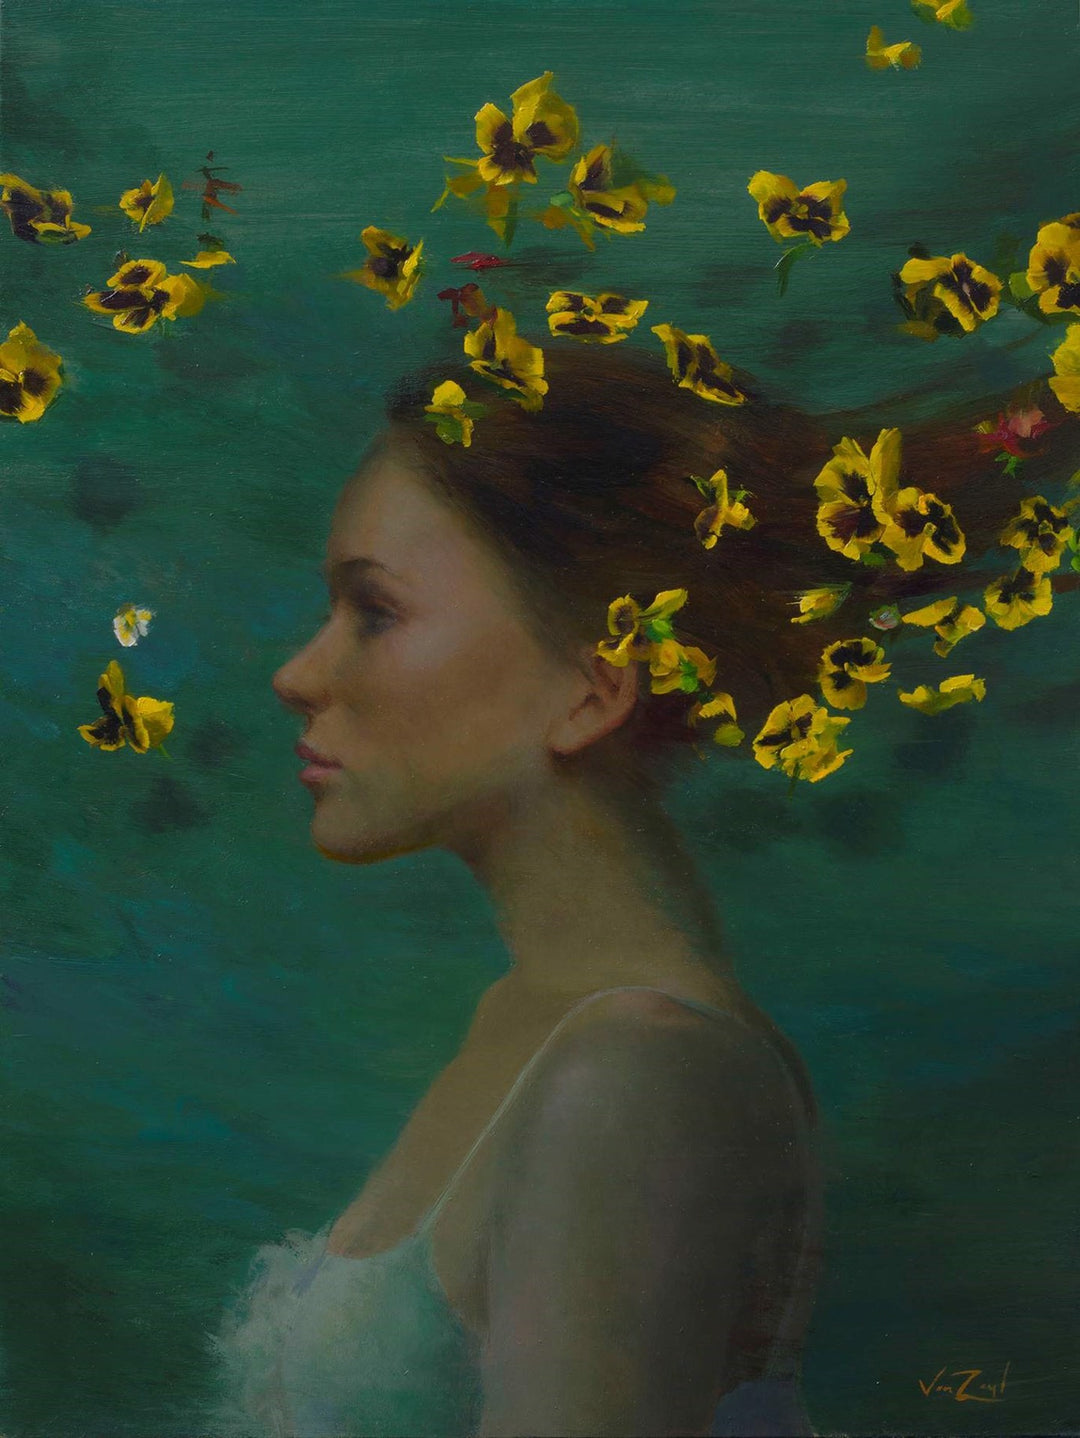 An oil painting of a woman by Michael Van Zeyl, adorned with yellow flowers in her hair, known as "Yellow Breeze" by Michael Van Zeyl.